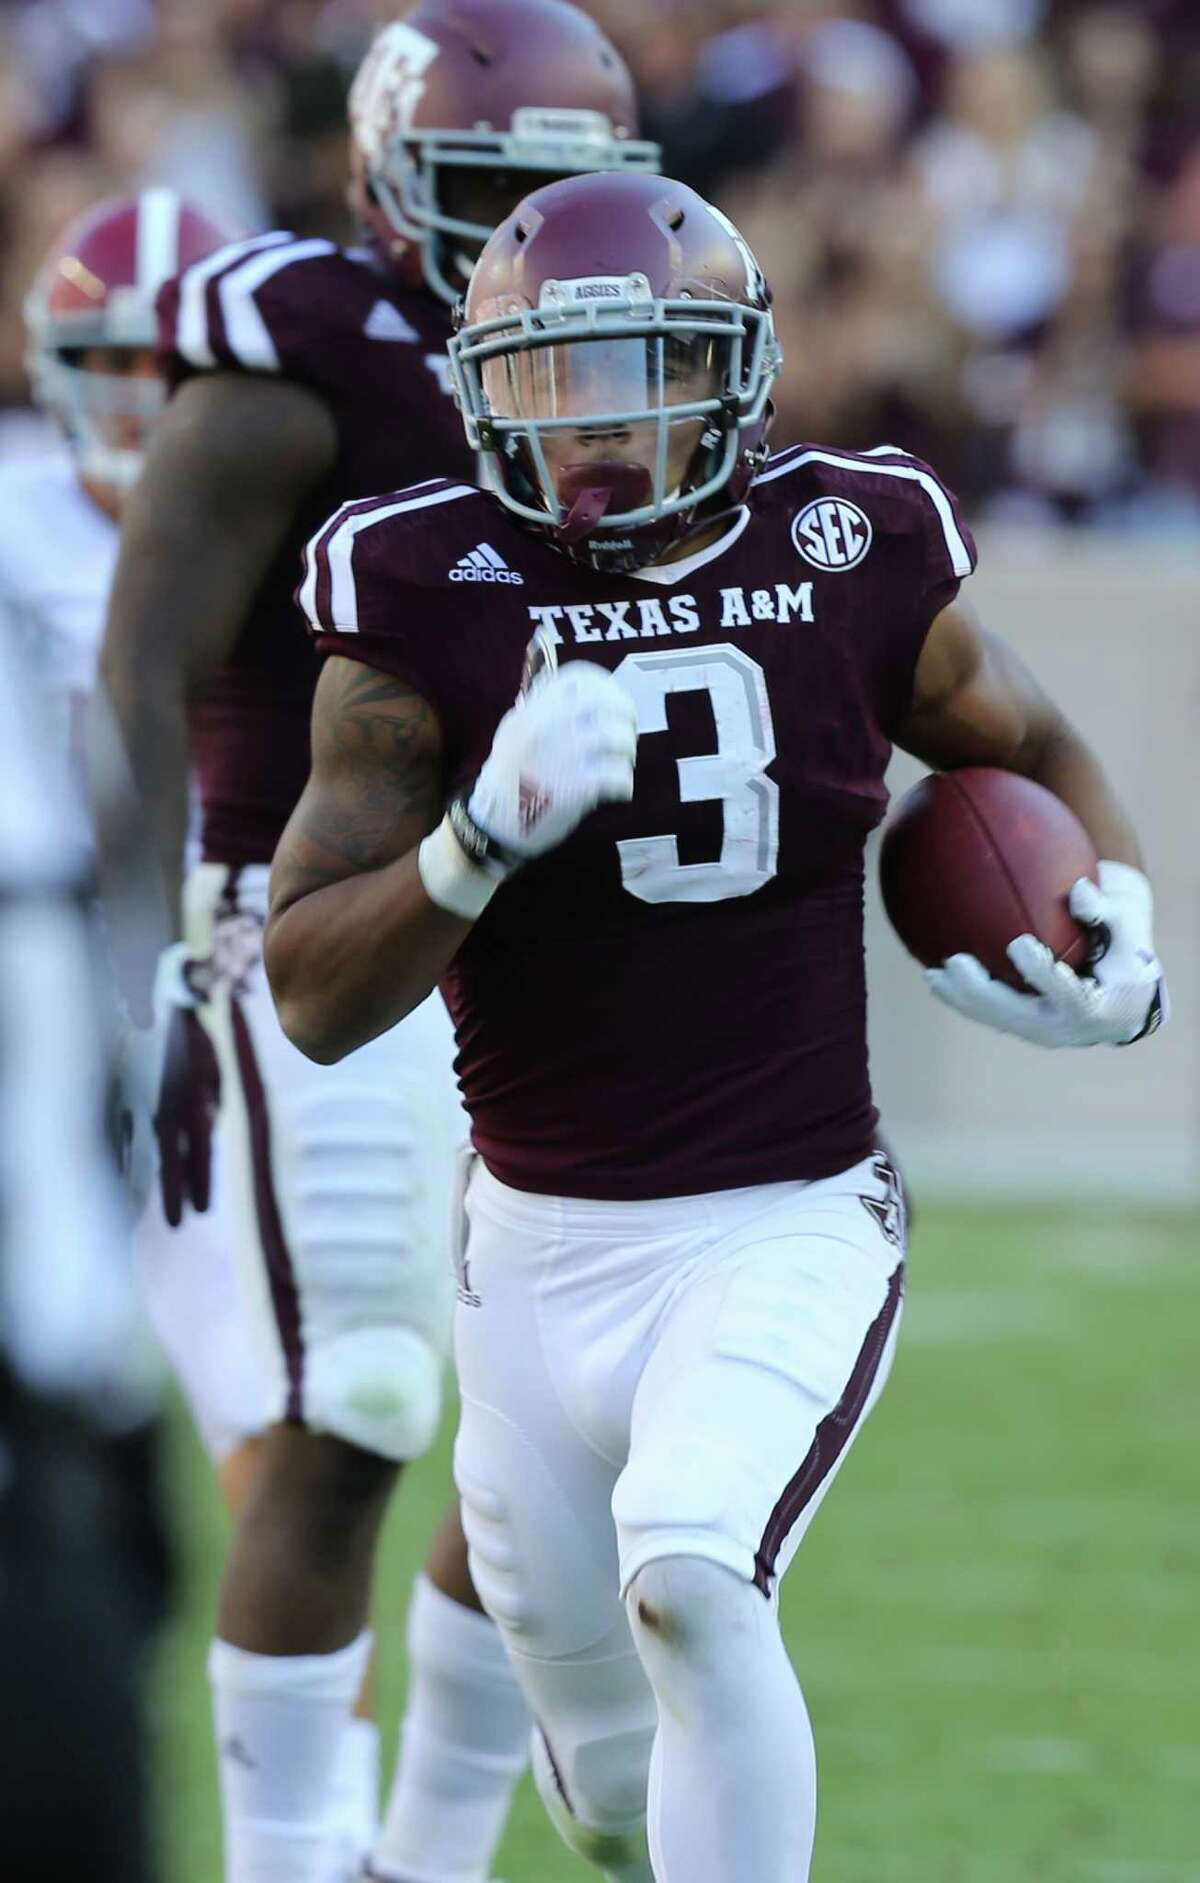 Texas A&M’s Christian Kirk makes his way to the end zone in the second quarter against Alabama on Oct. 17, 2015, in College Station.